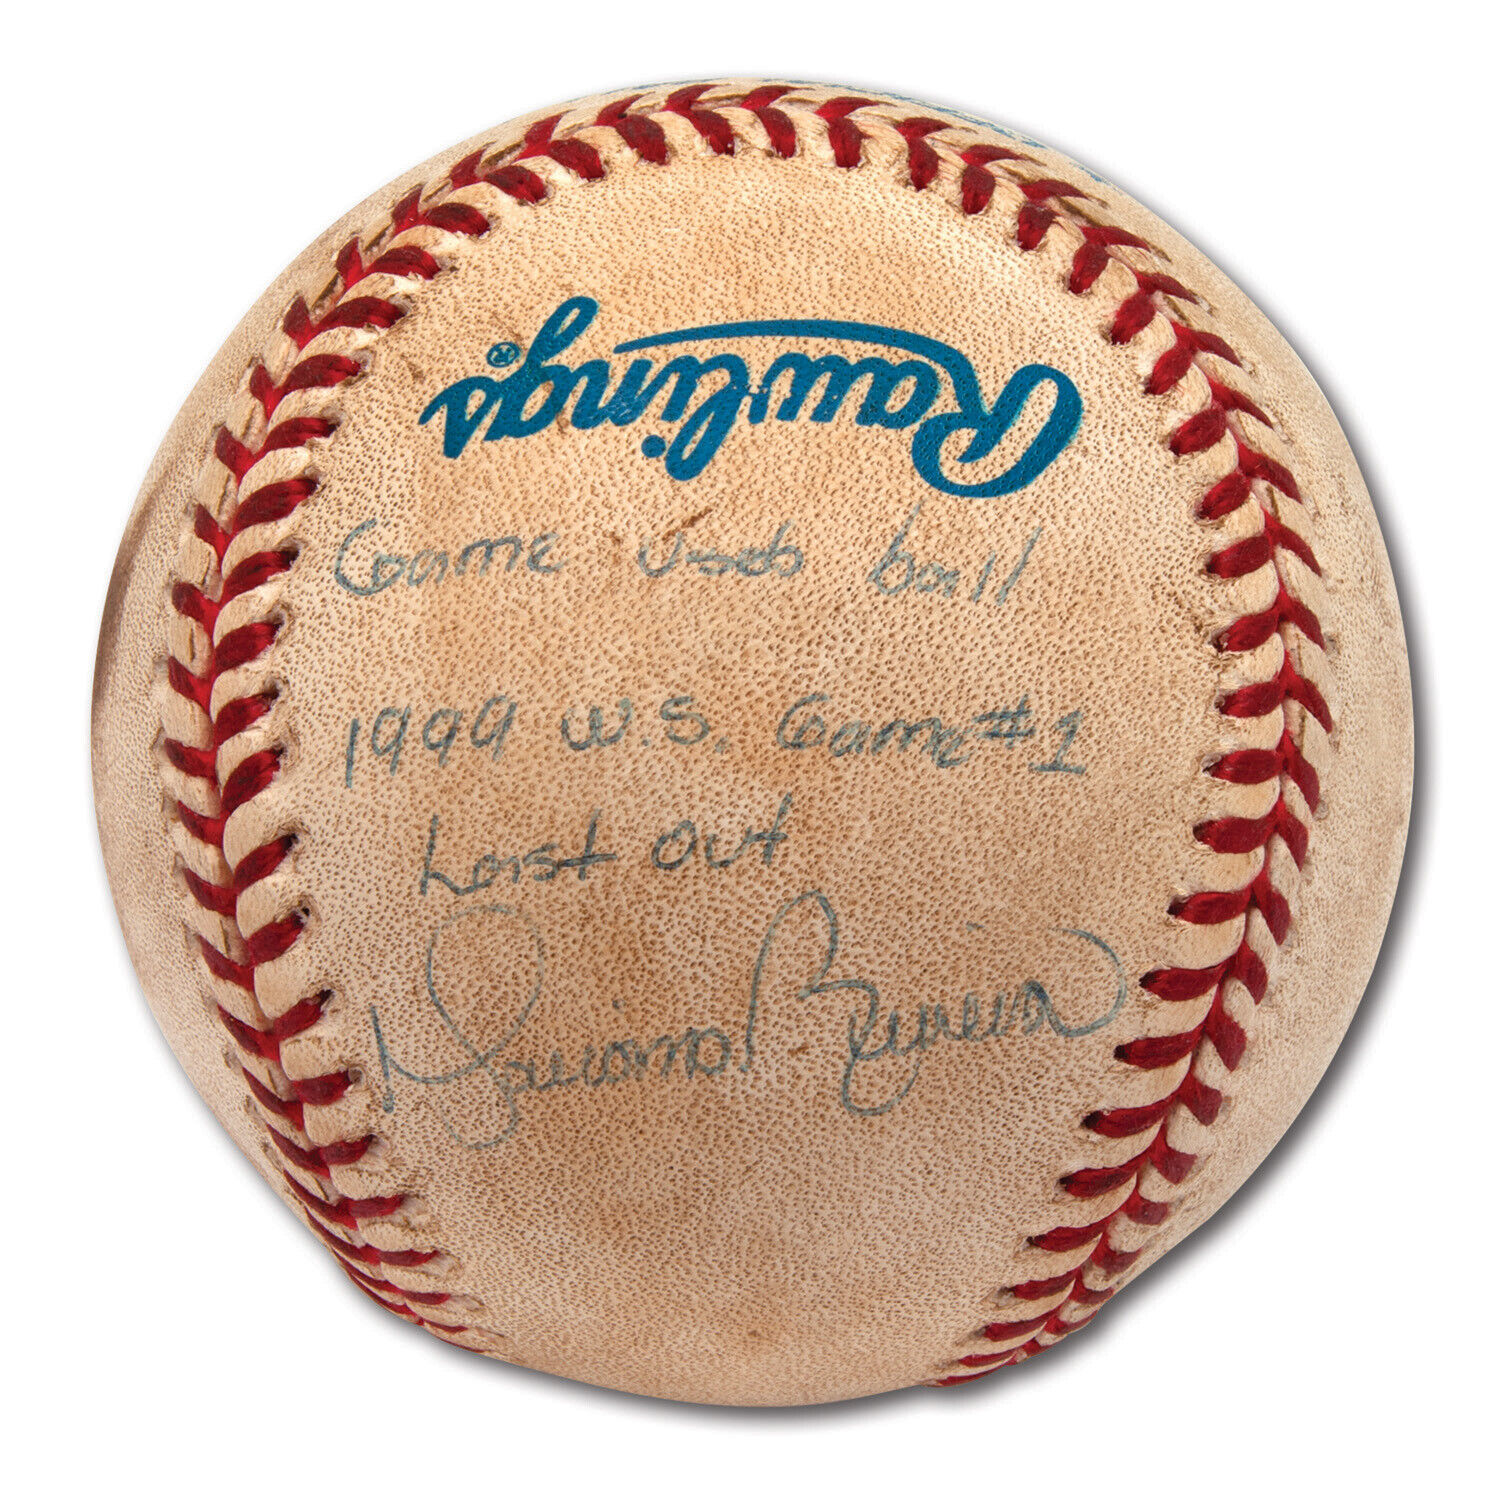 The Final Out Baseball Of The 1999 World Series Signed By Mariano Rivera PSA DNA